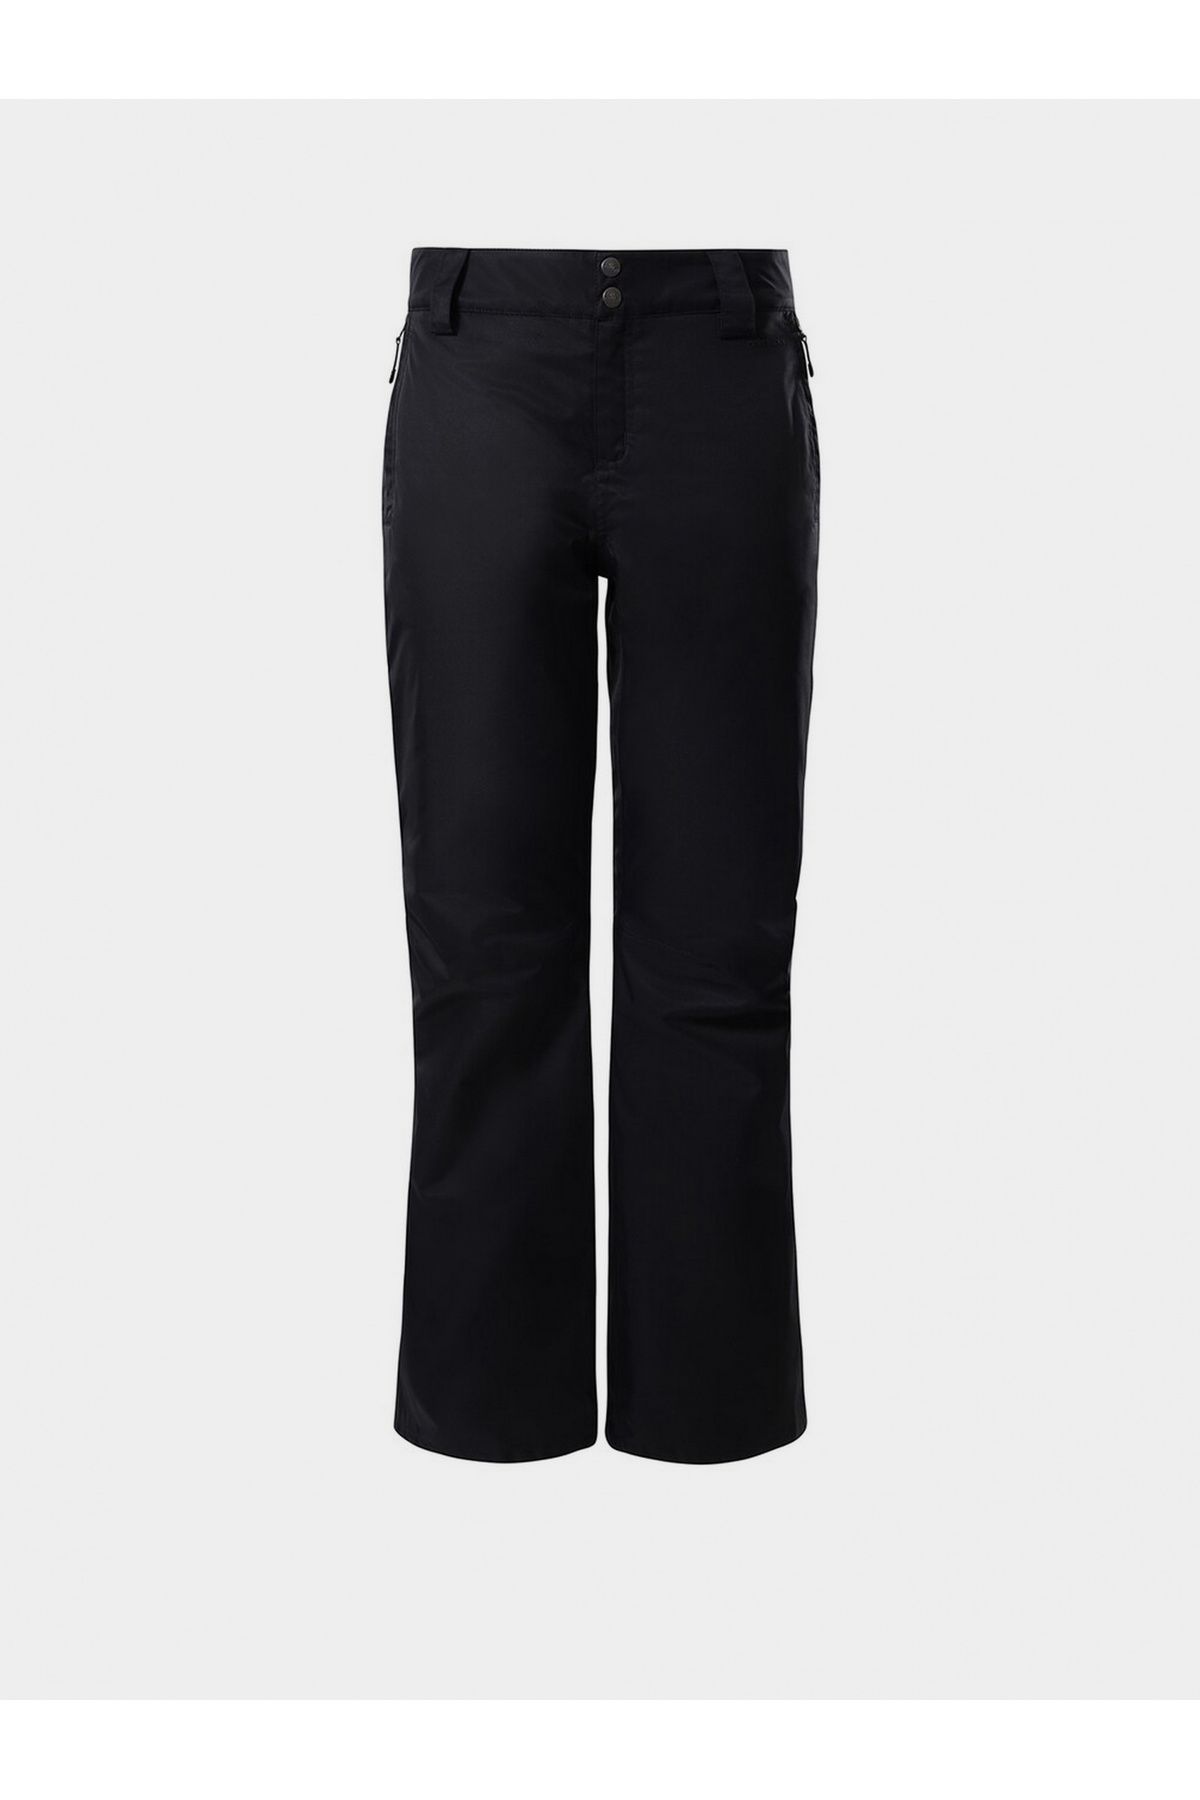 The North Face W SALLY PANT